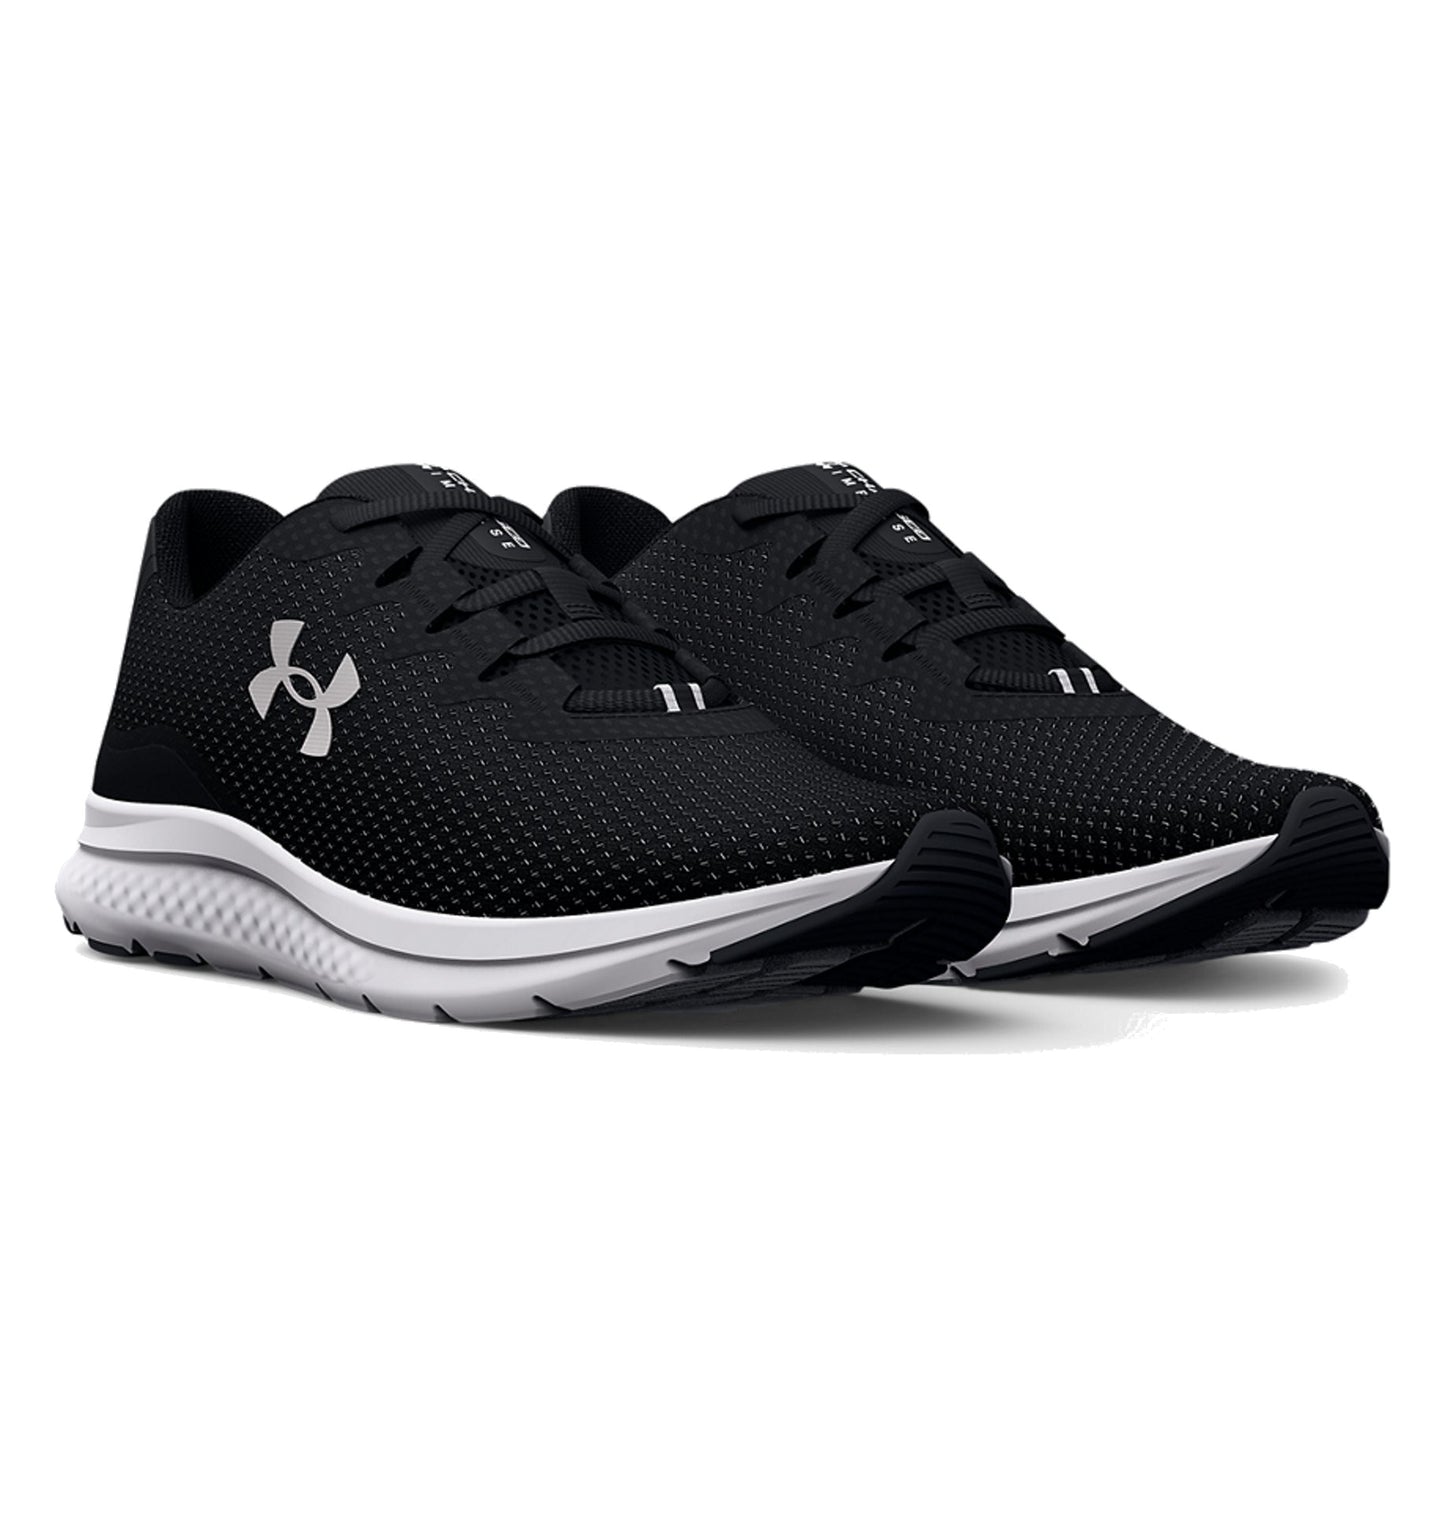 Under Armour Men's Charged Impulse 3 Running Shoes - Black